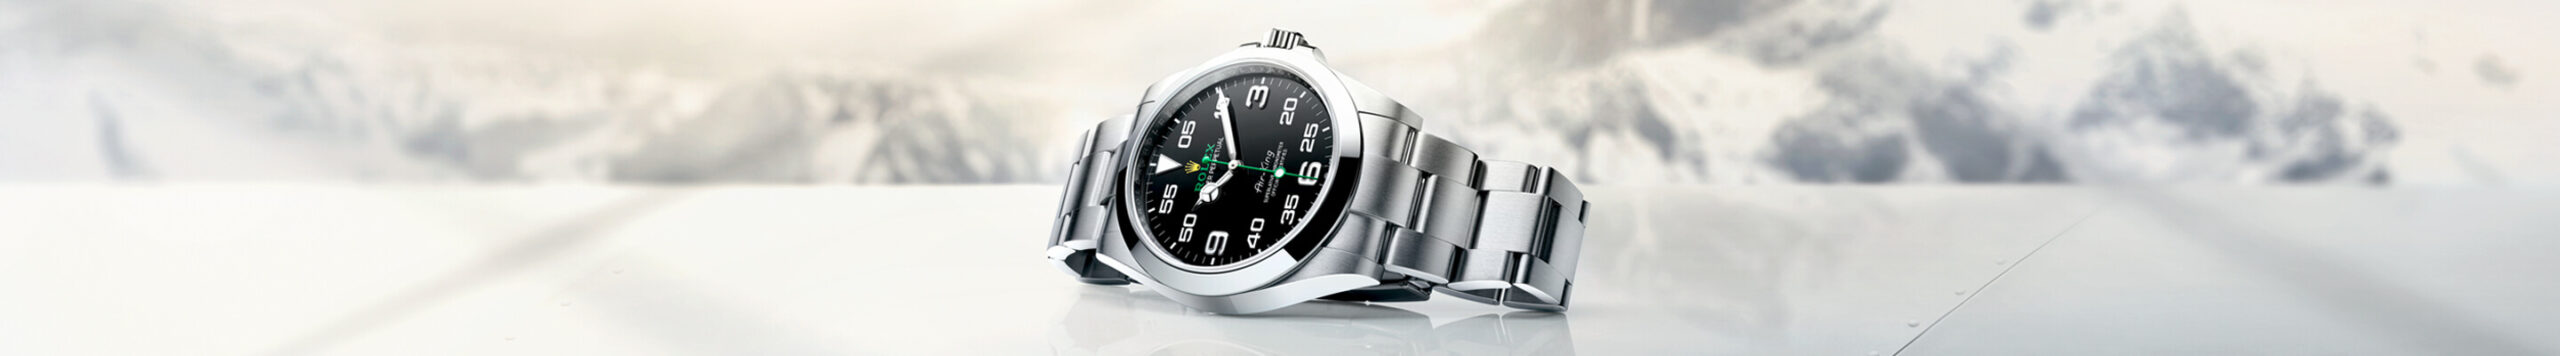 A silver analog wristwatch with a black dial and green hands on a reflective surface, set against a blurred winter landscape background.